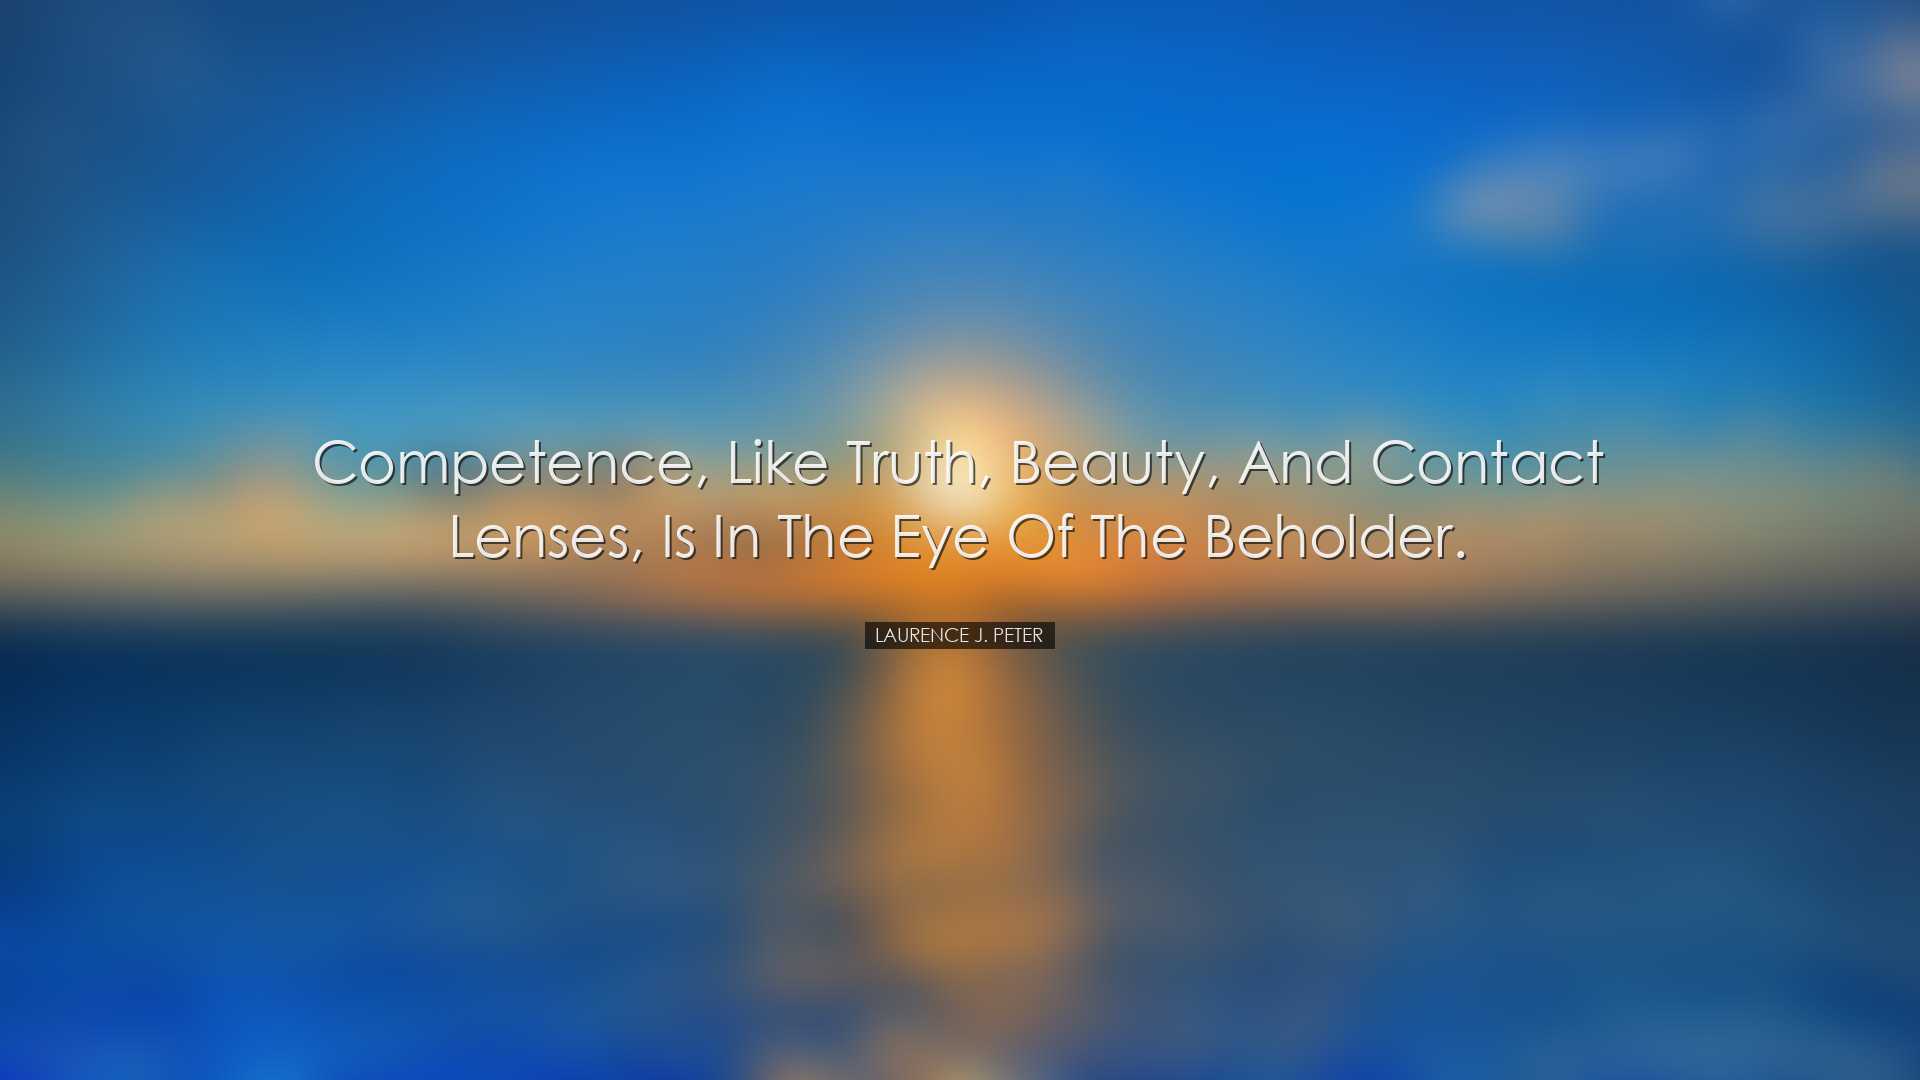 Competence, like truth, beauty, and contact lenses, is in the eye